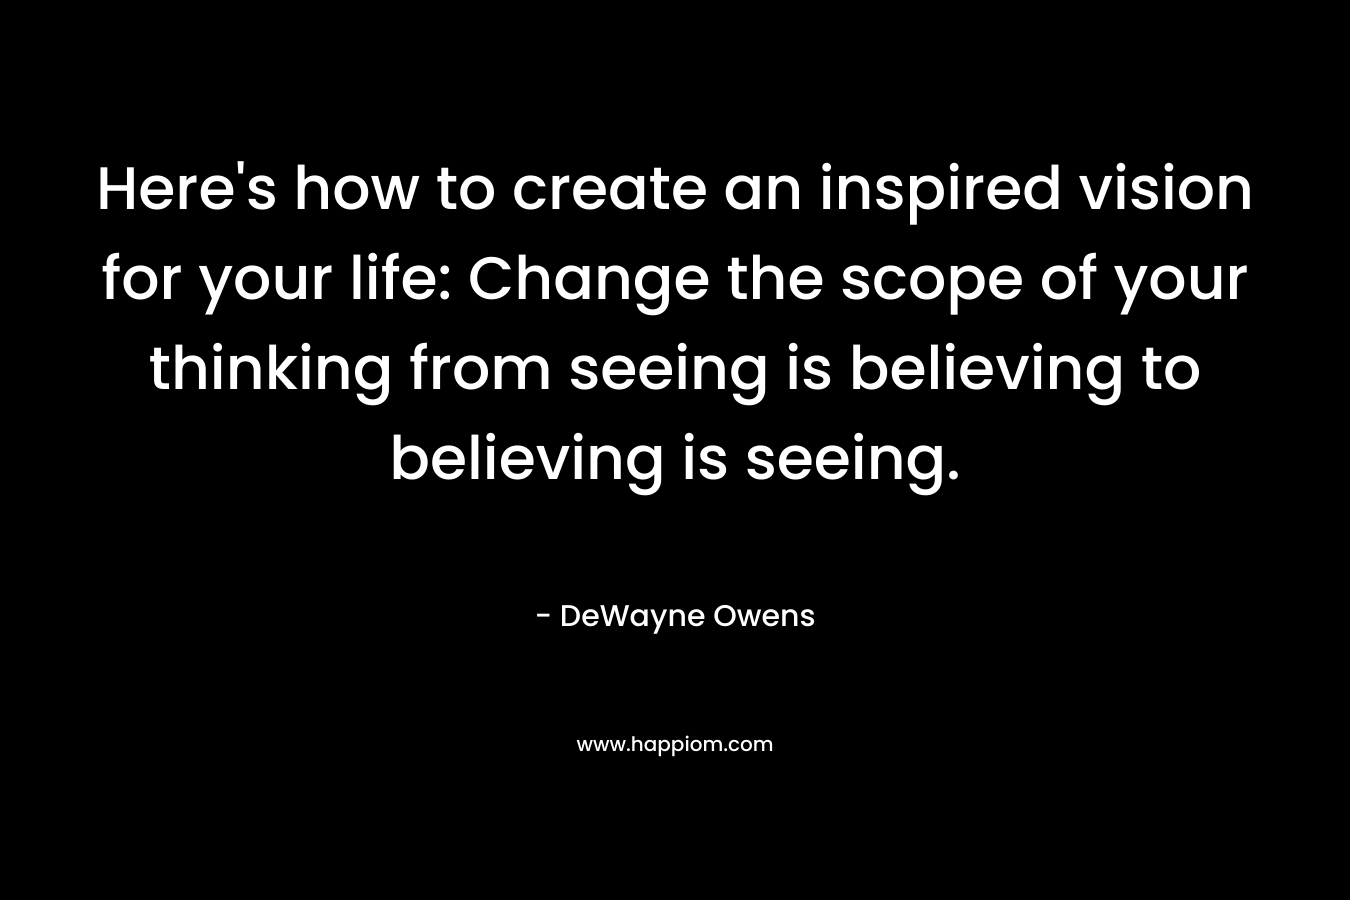 Here’s how to create an inspired vision for your life: Change the scope of your thinking from seeing is believing to believing is seeing. – DeWayne Owens